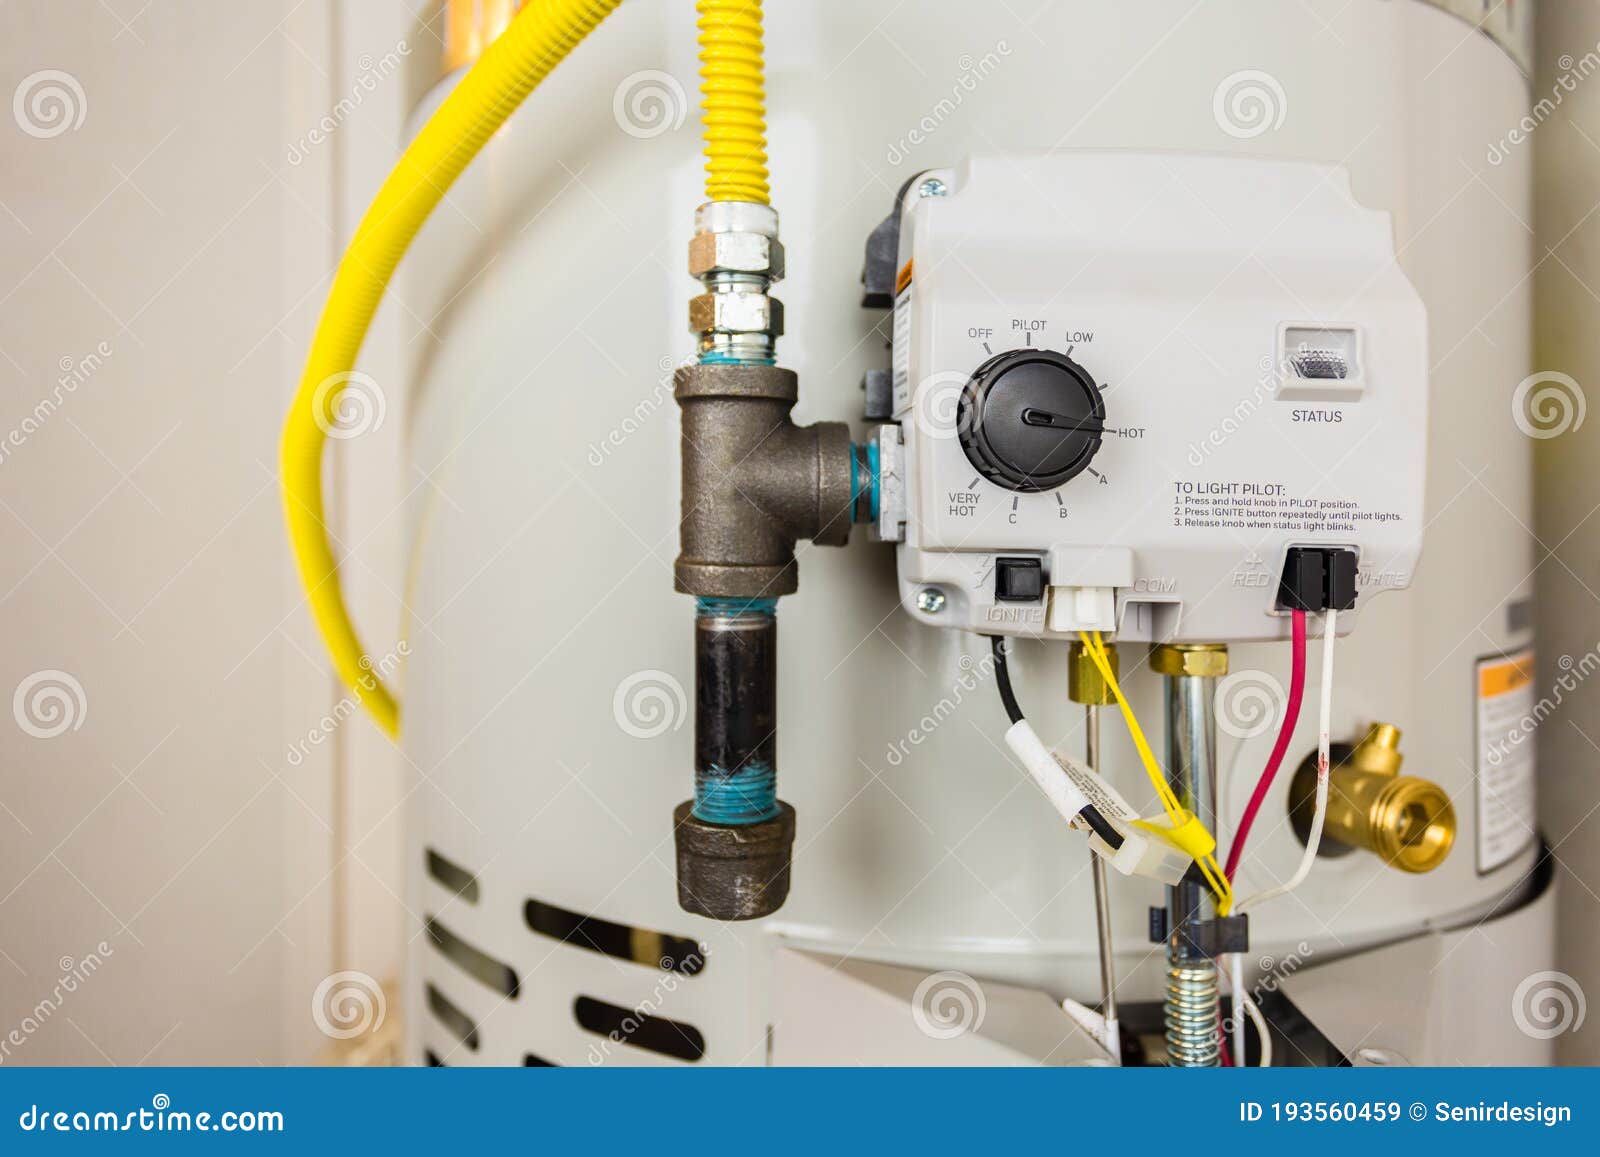 Modern Hot Water Heater Control SD 4513 Stock Image - Image of